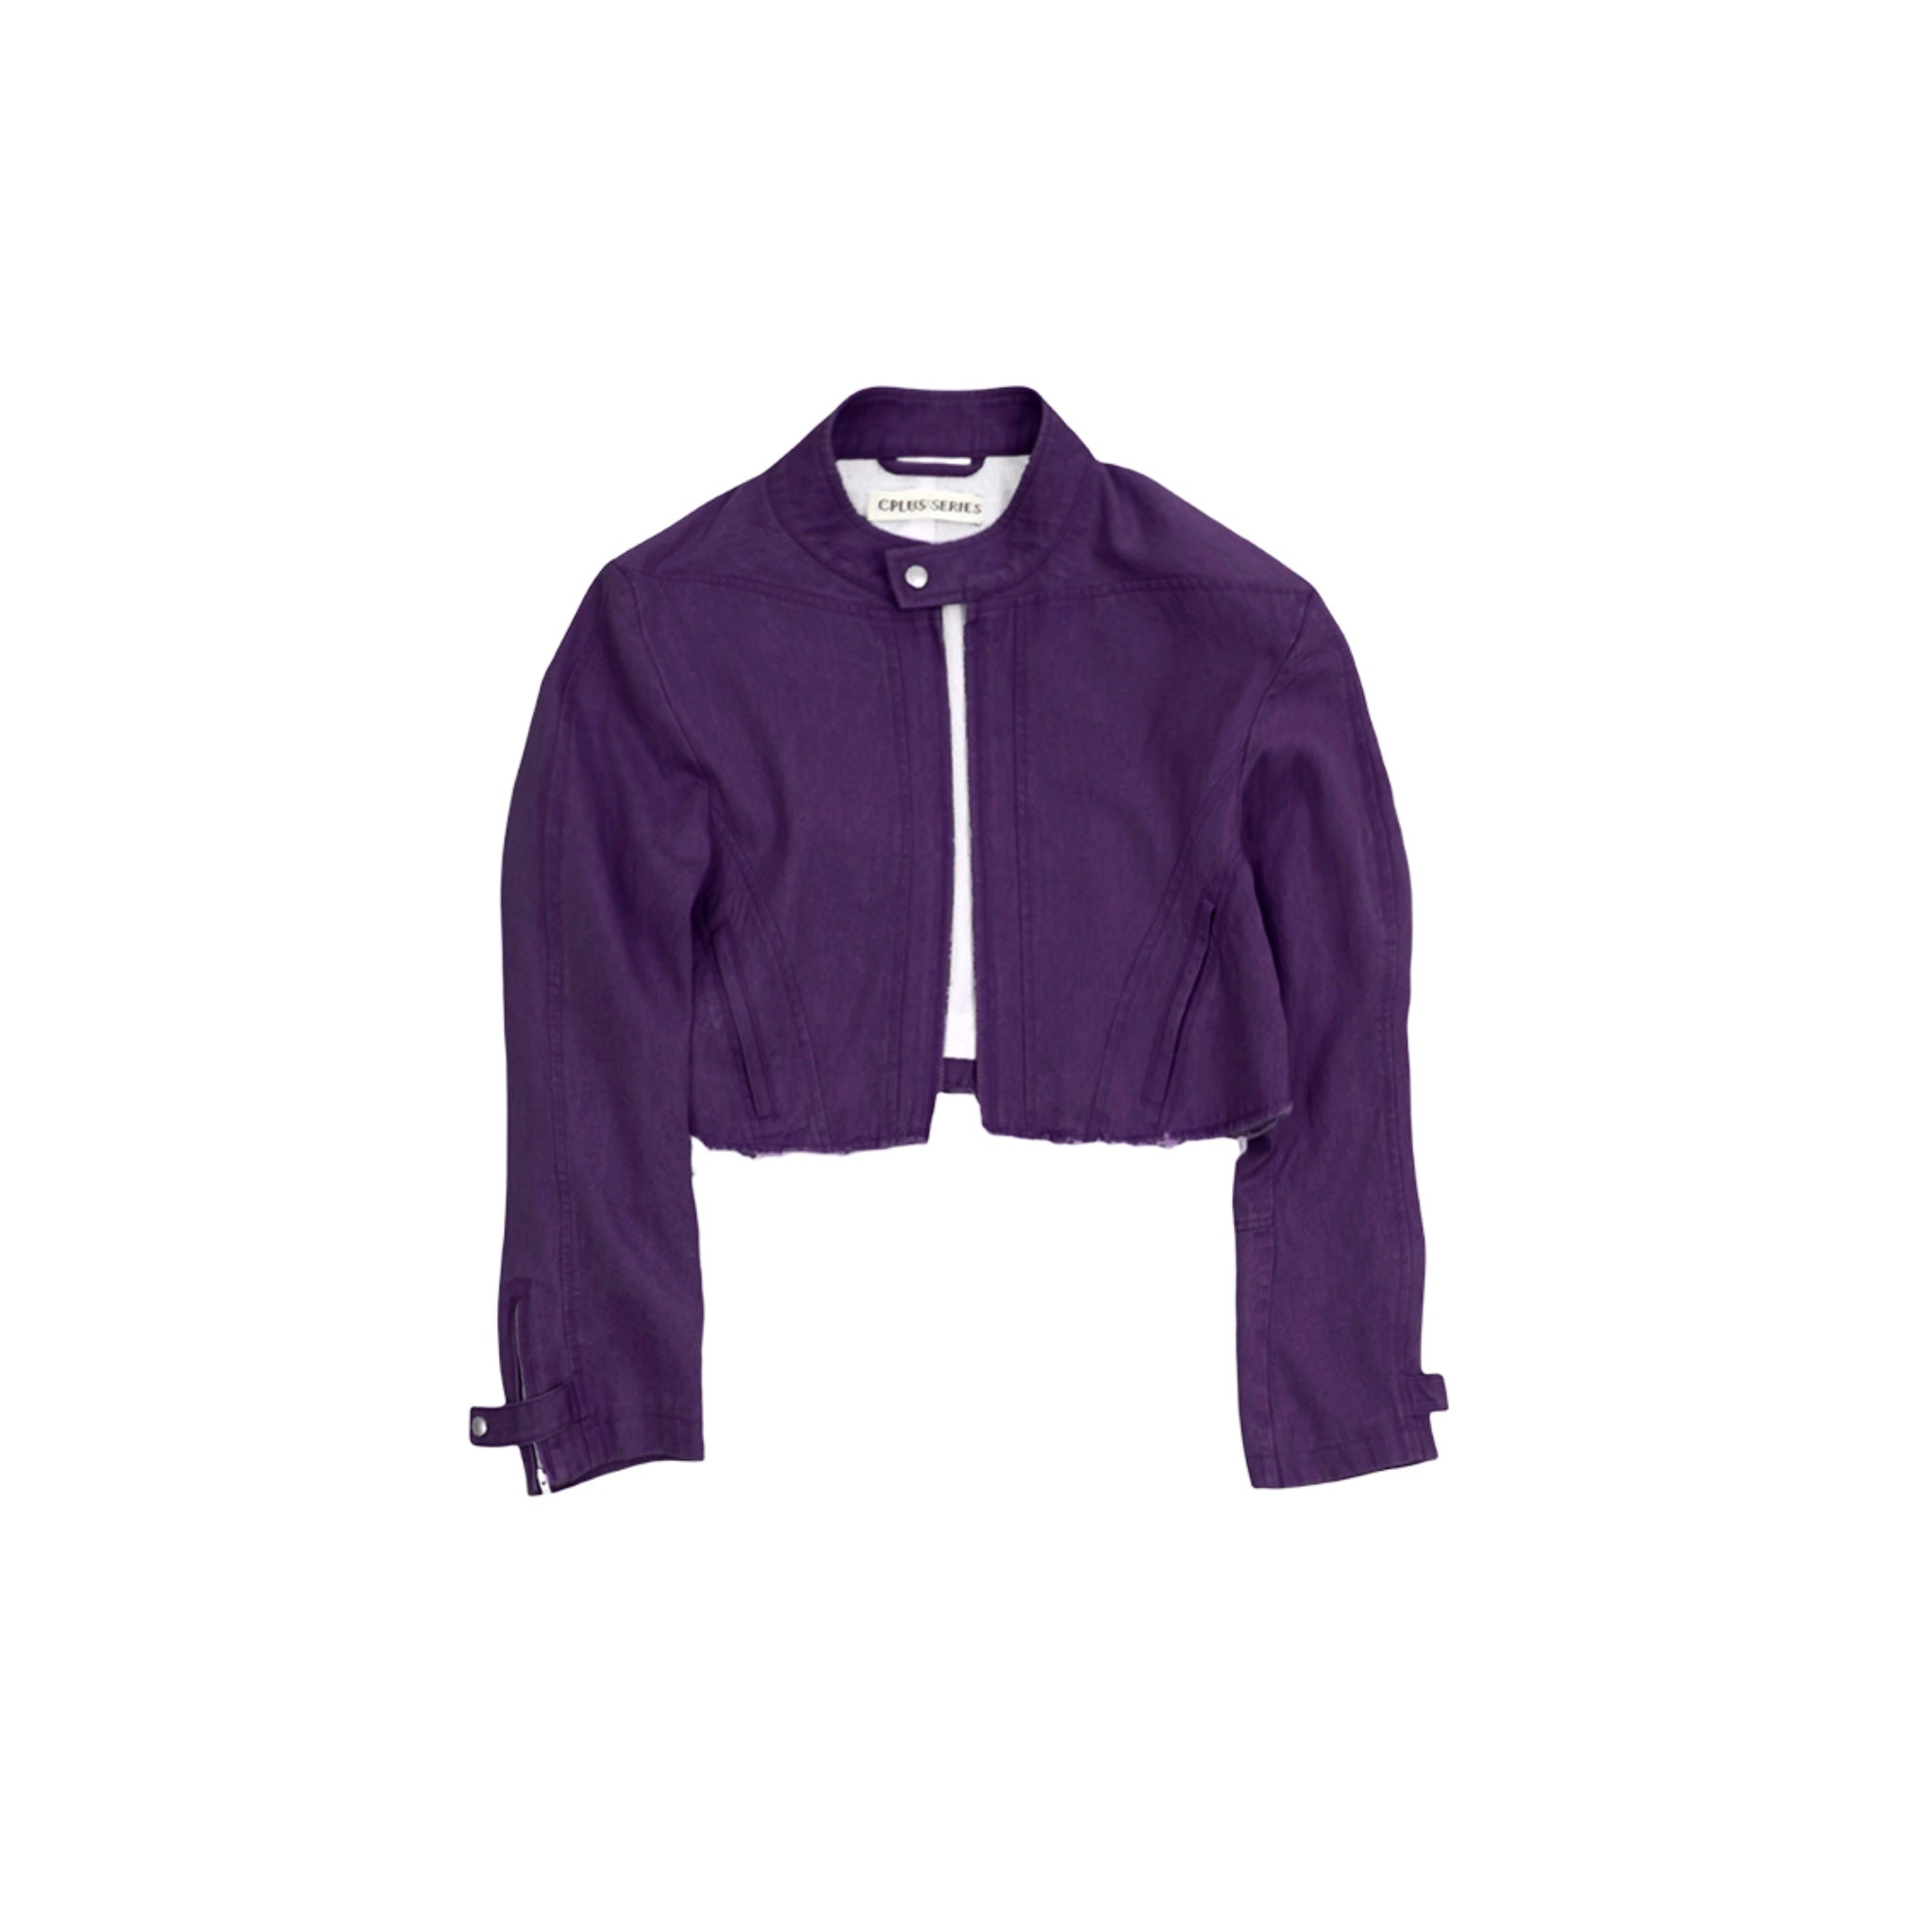 CPLUS SERIES Purple Washed Denim Jacket with Stylelines | MADA IN CHINA